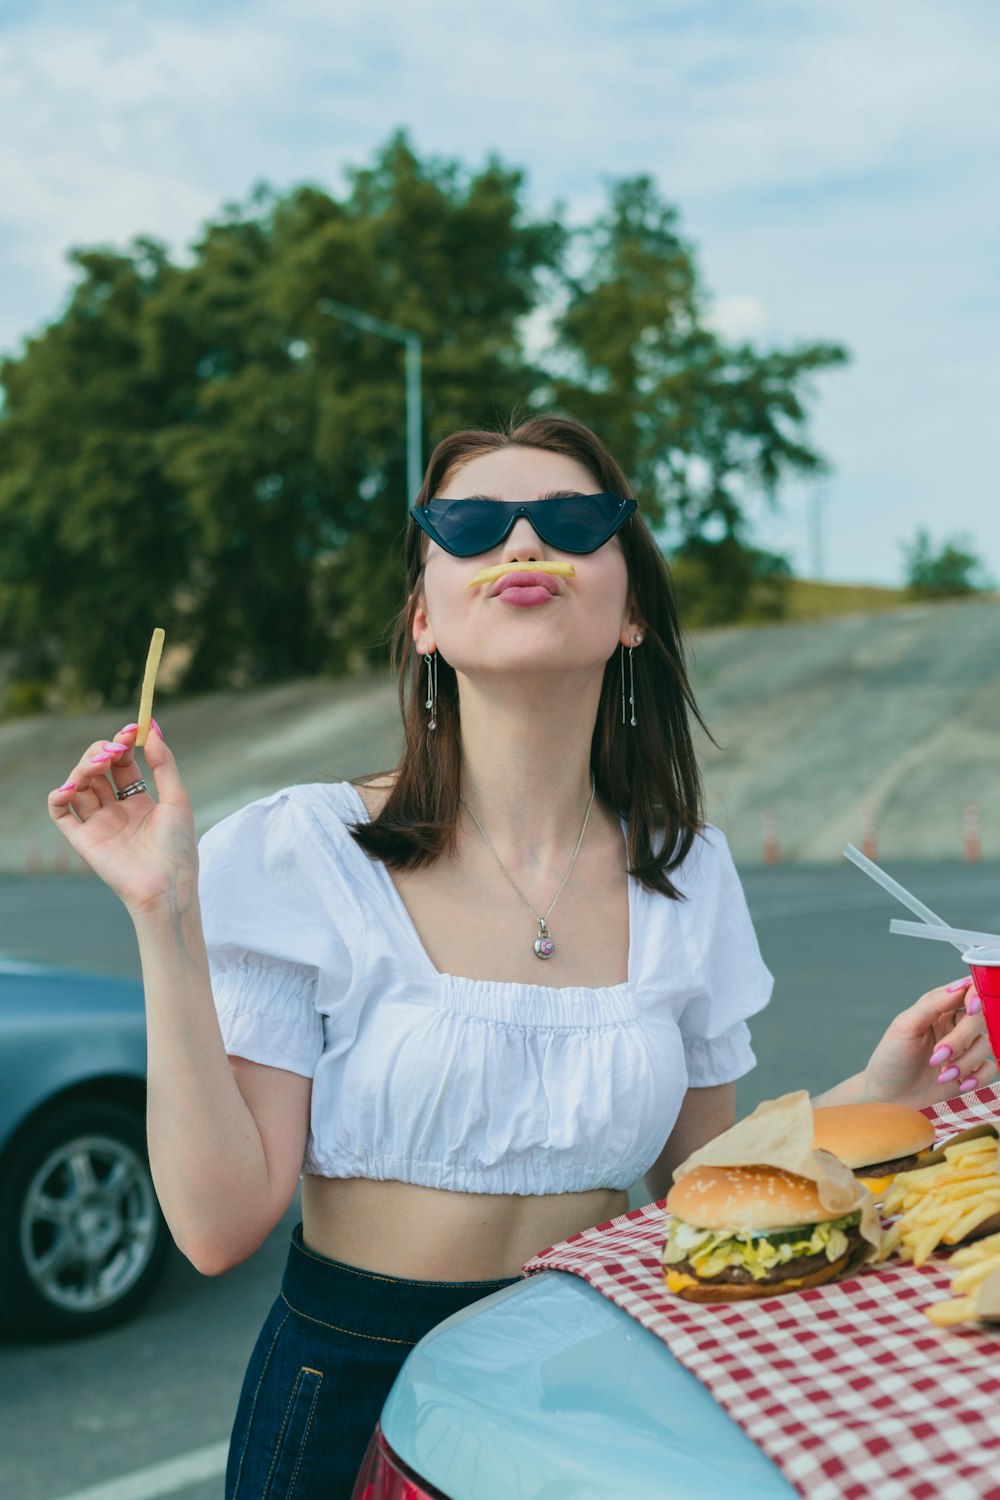 a woman in a crop top holding a cigarette and a sandwich